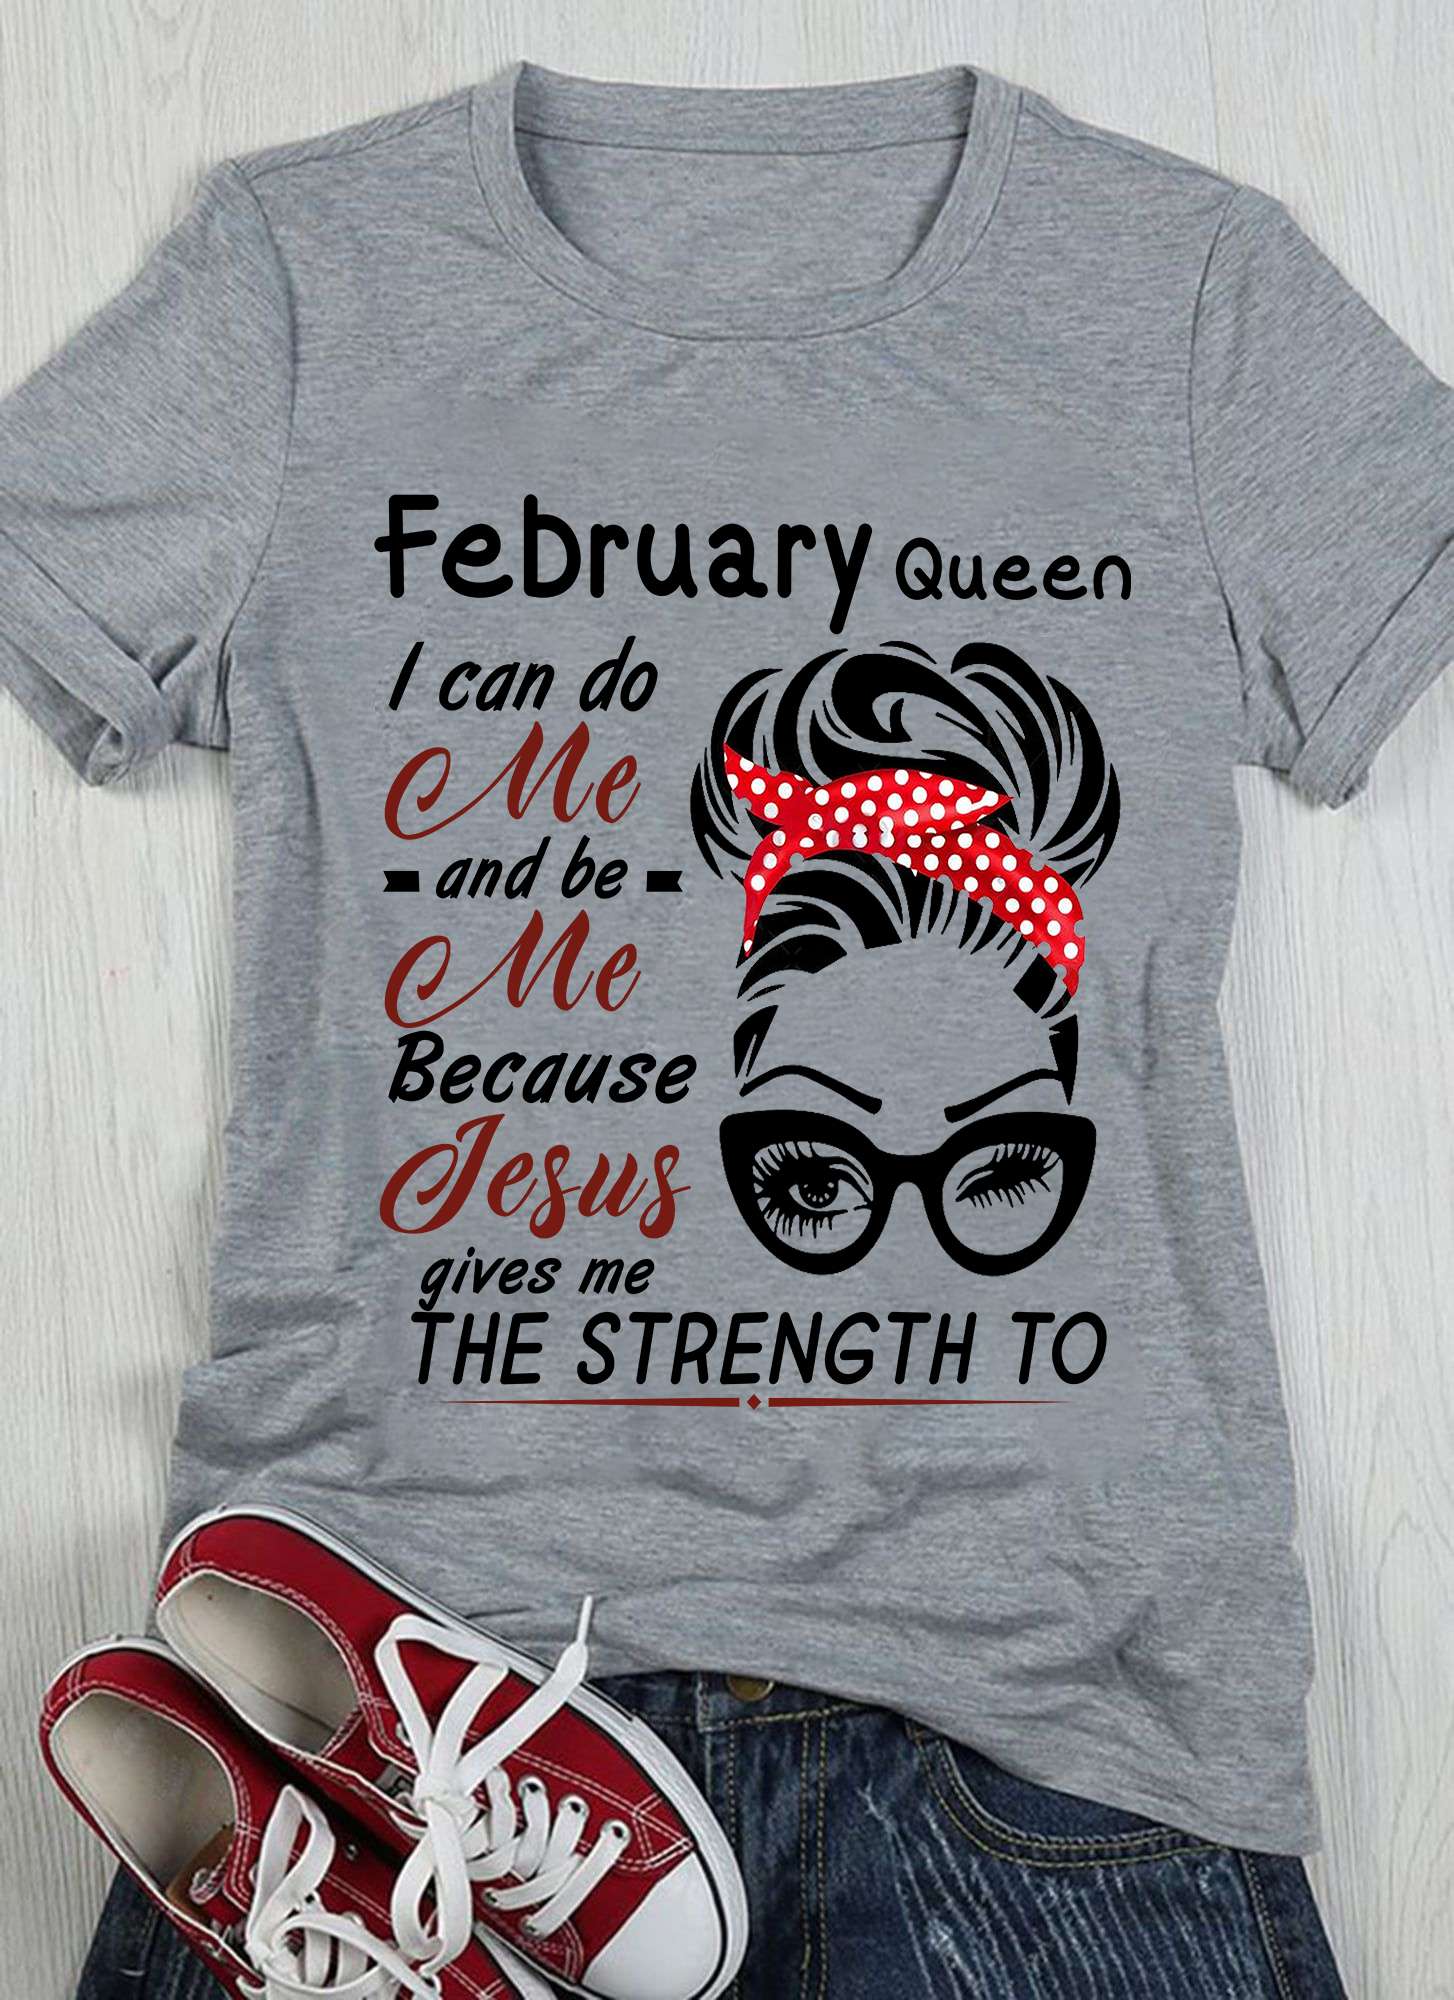 February queen I can do me and be me because Jesus gives me the strength to - Jesus the god